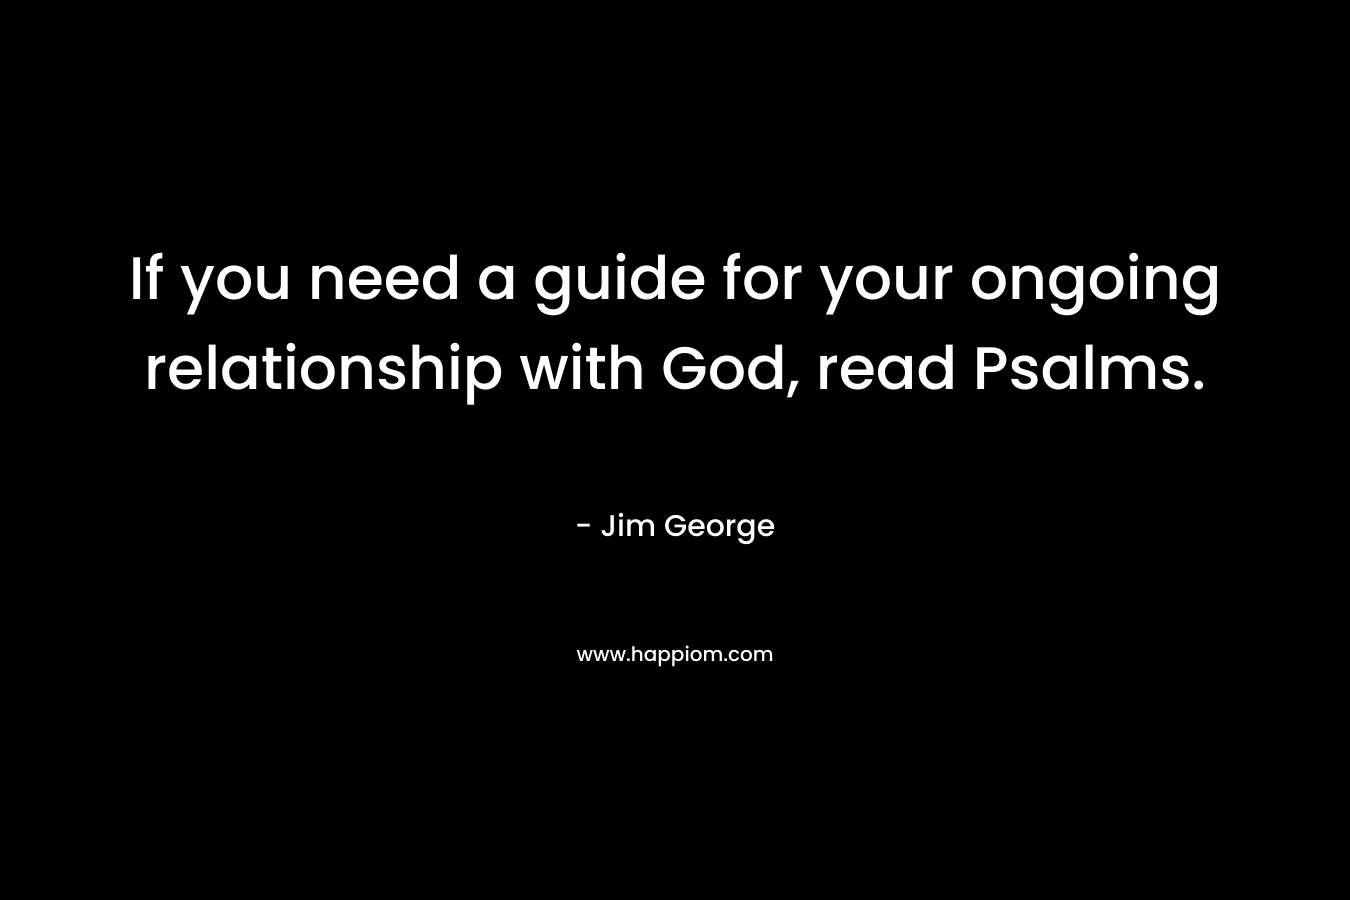 If you need a guide for your ongoing relationship with God, read Psalms.